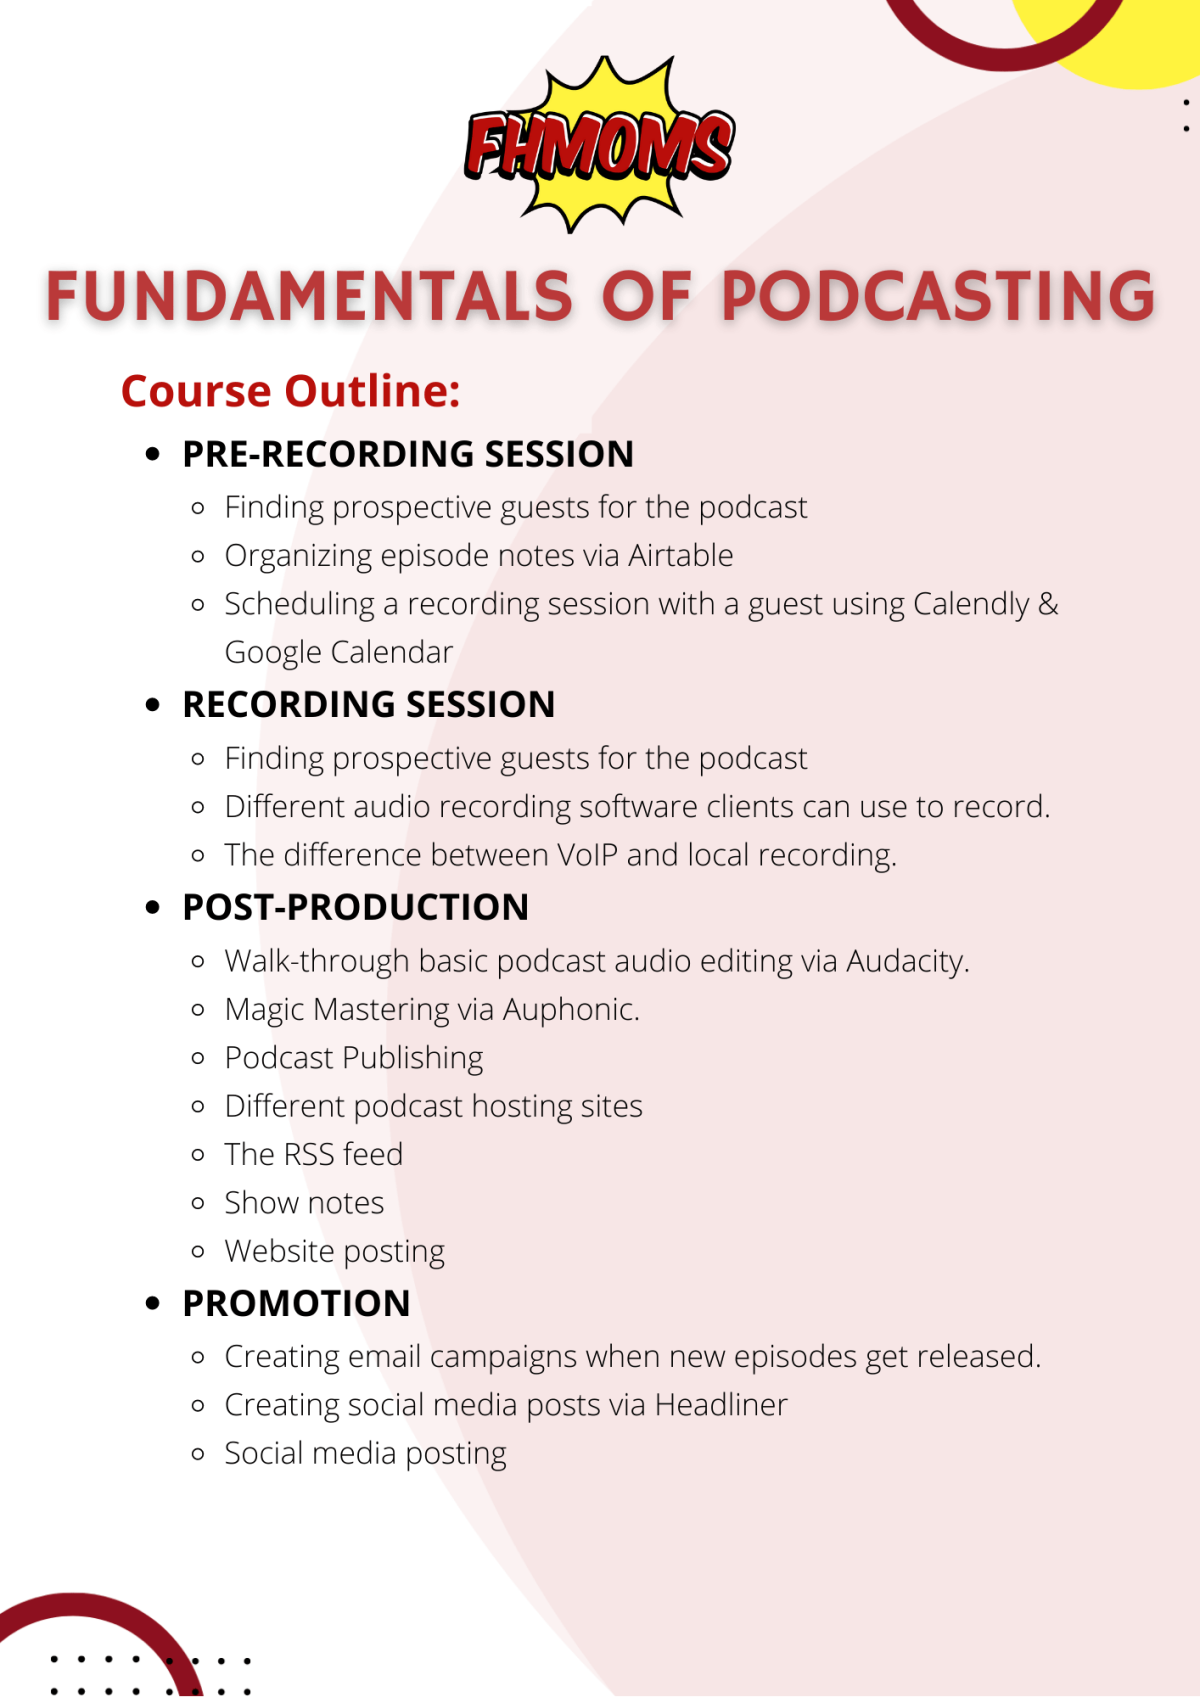 Fundamentals of Podcasting Course Outline